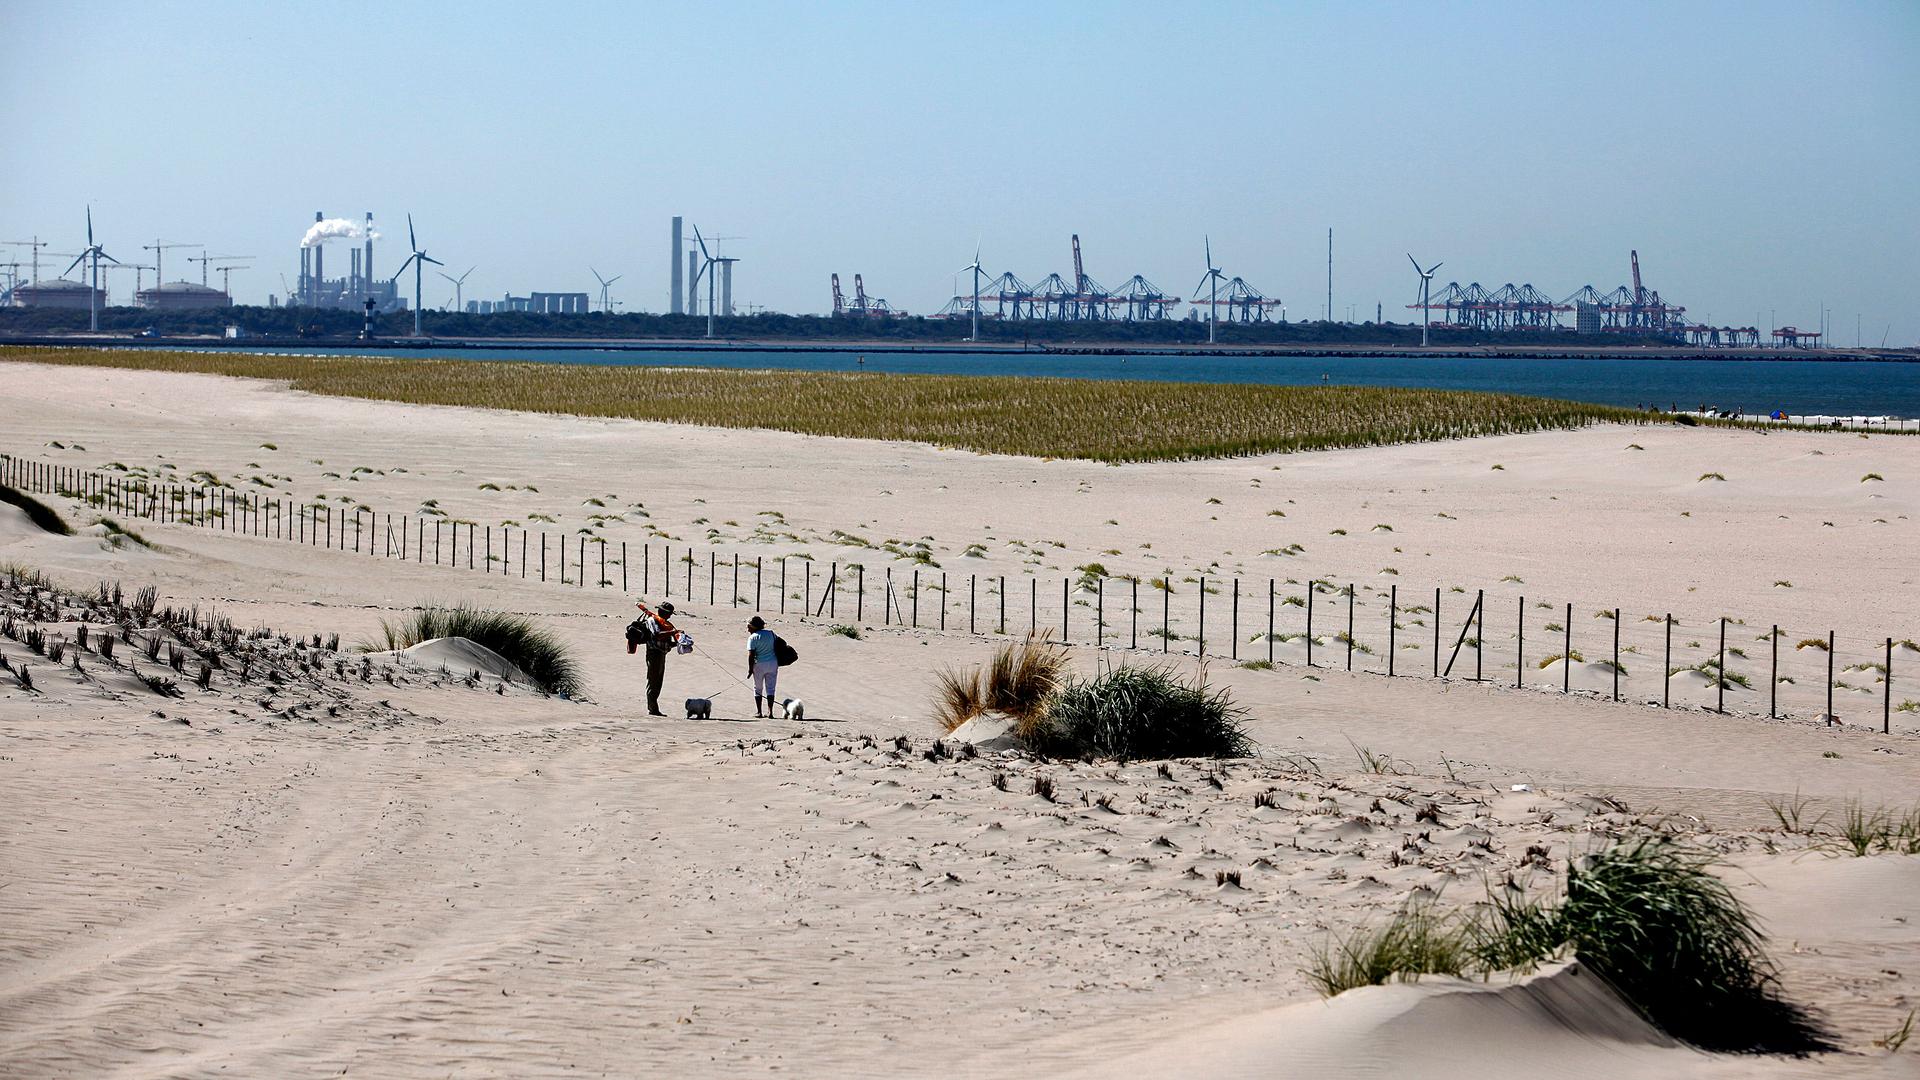 Two people walk across the beach sand. Across the water are wind turbines and other buildings